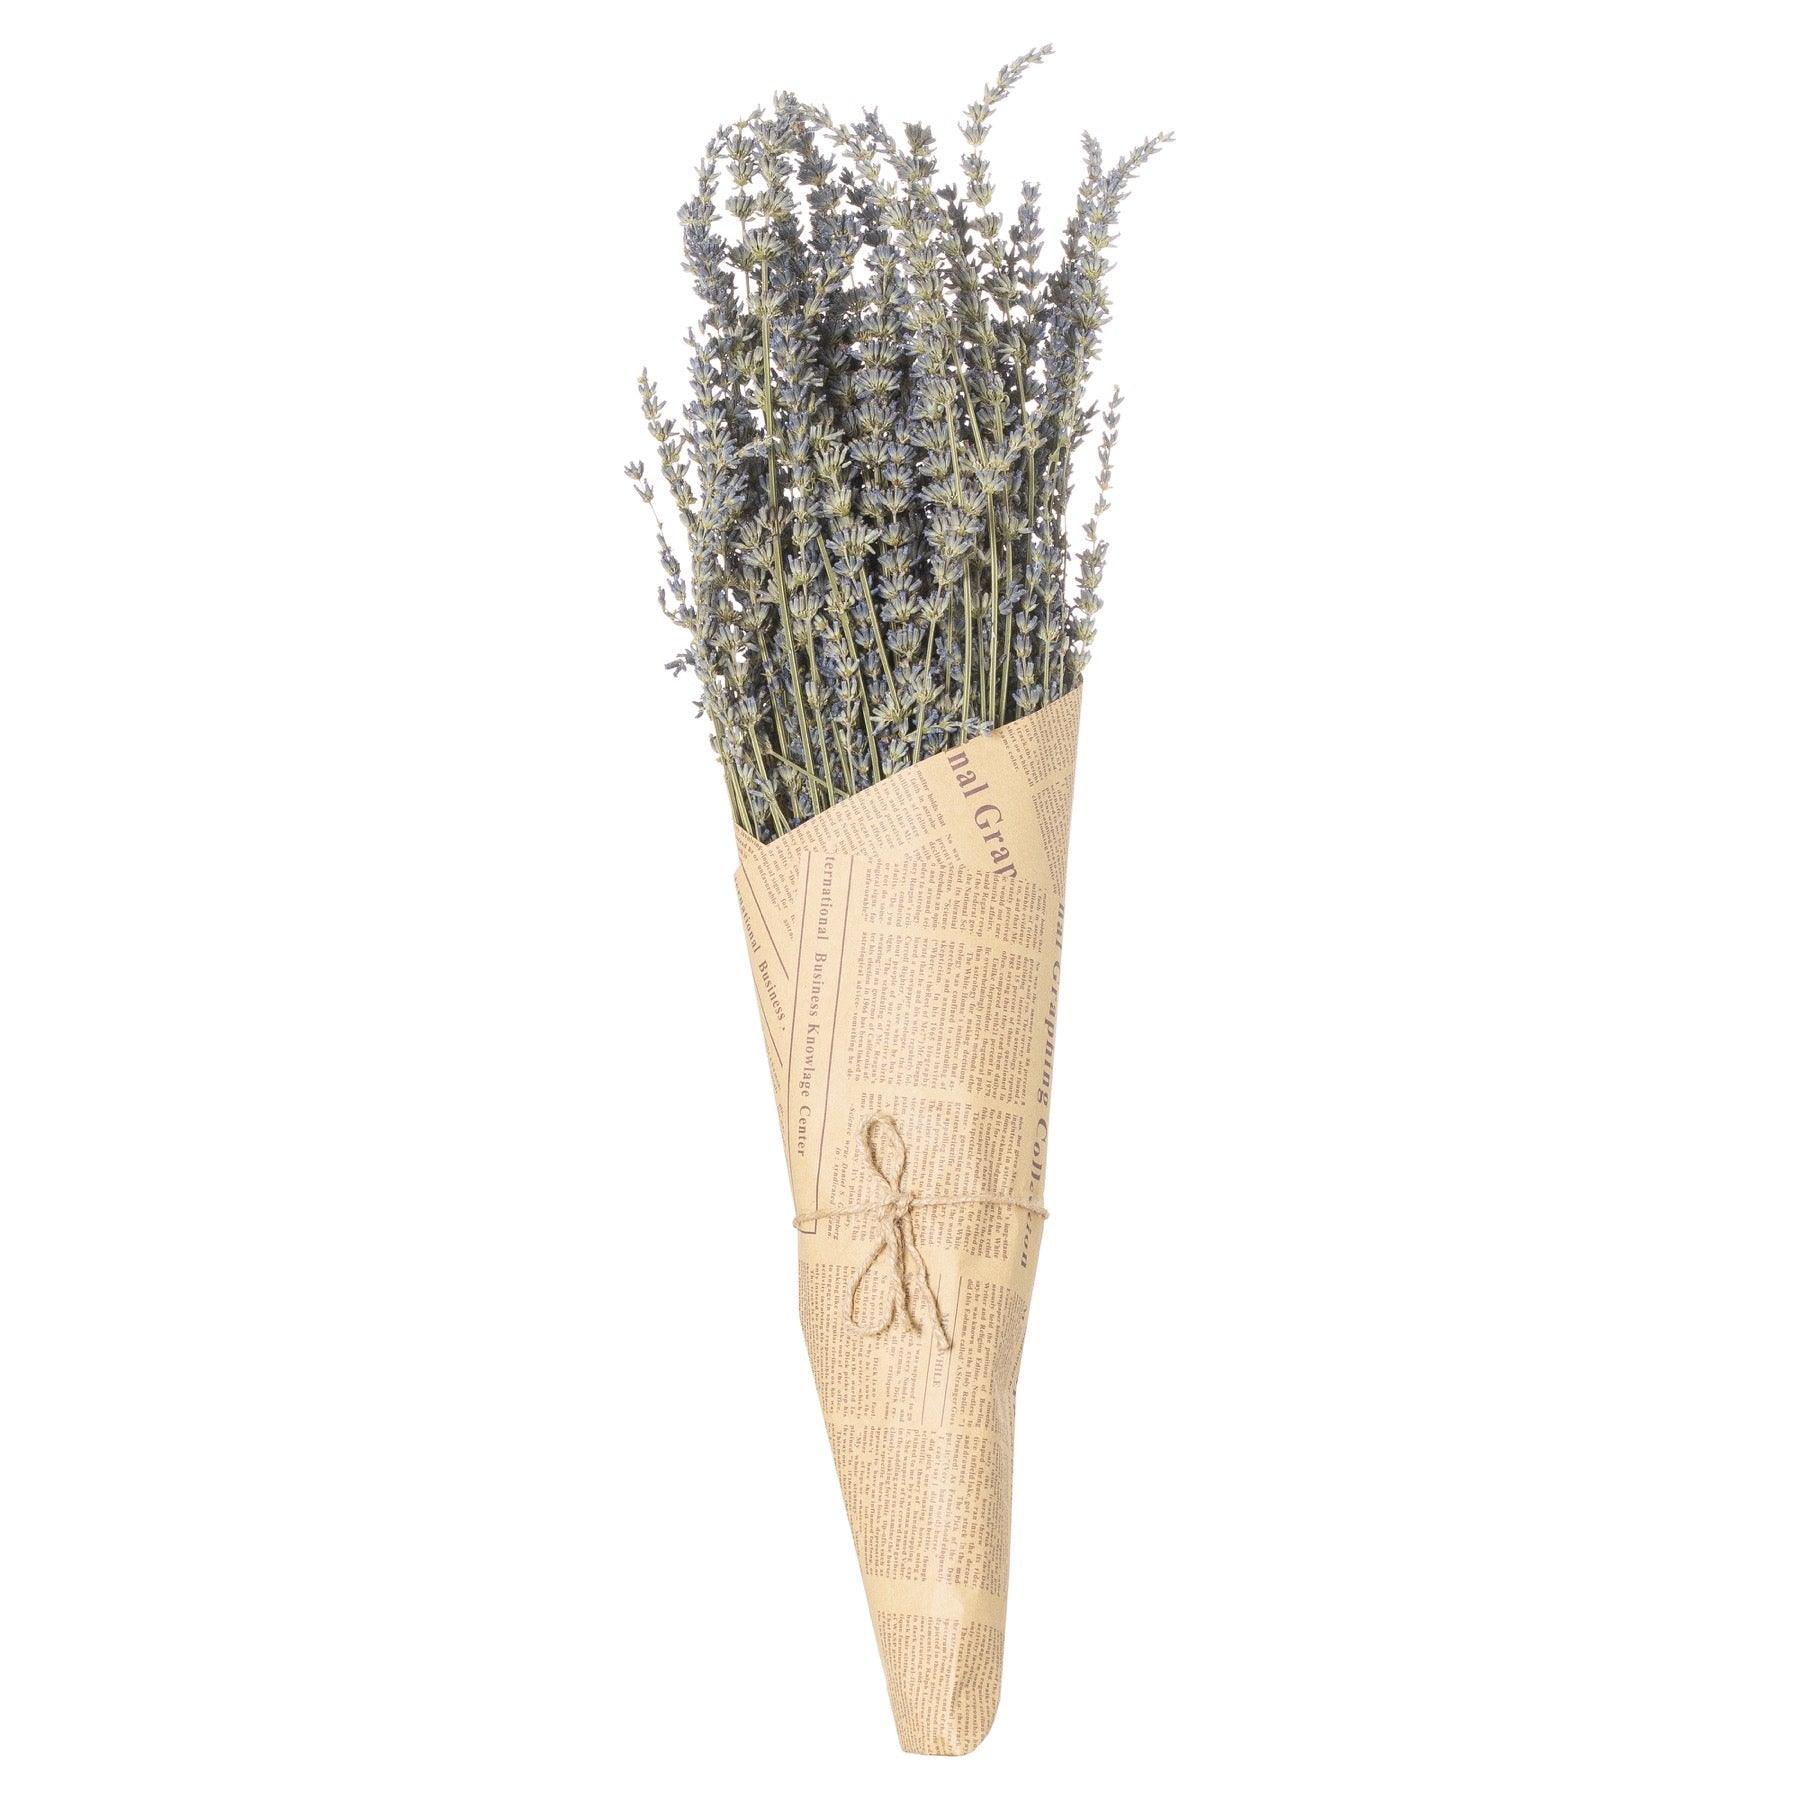 Dried lavender Bunch - Vookoo Lifestyle